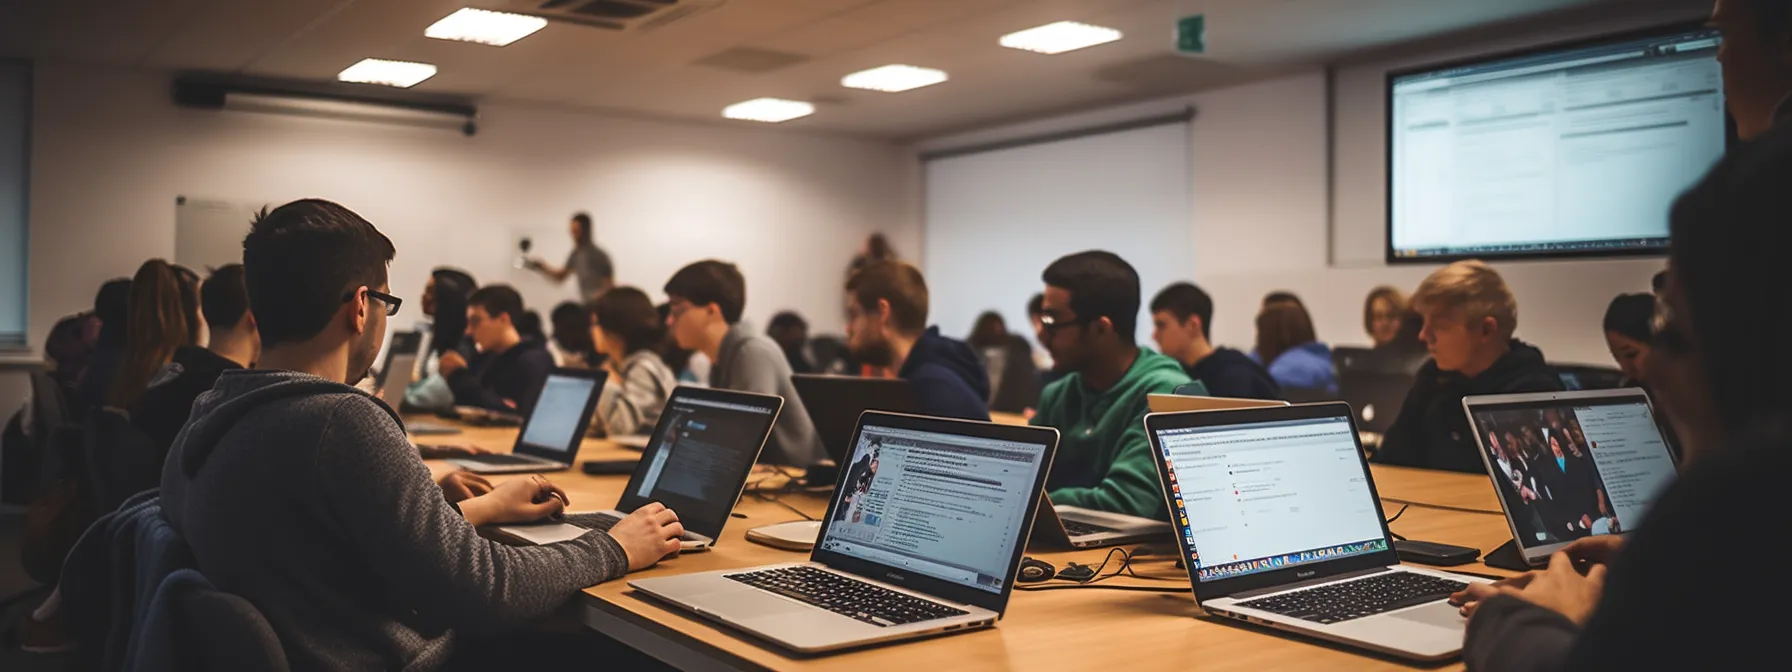 a group of students sitting in a classroom, typing on their laptops and taking notes as an seo specialist speaks at the front of the room.